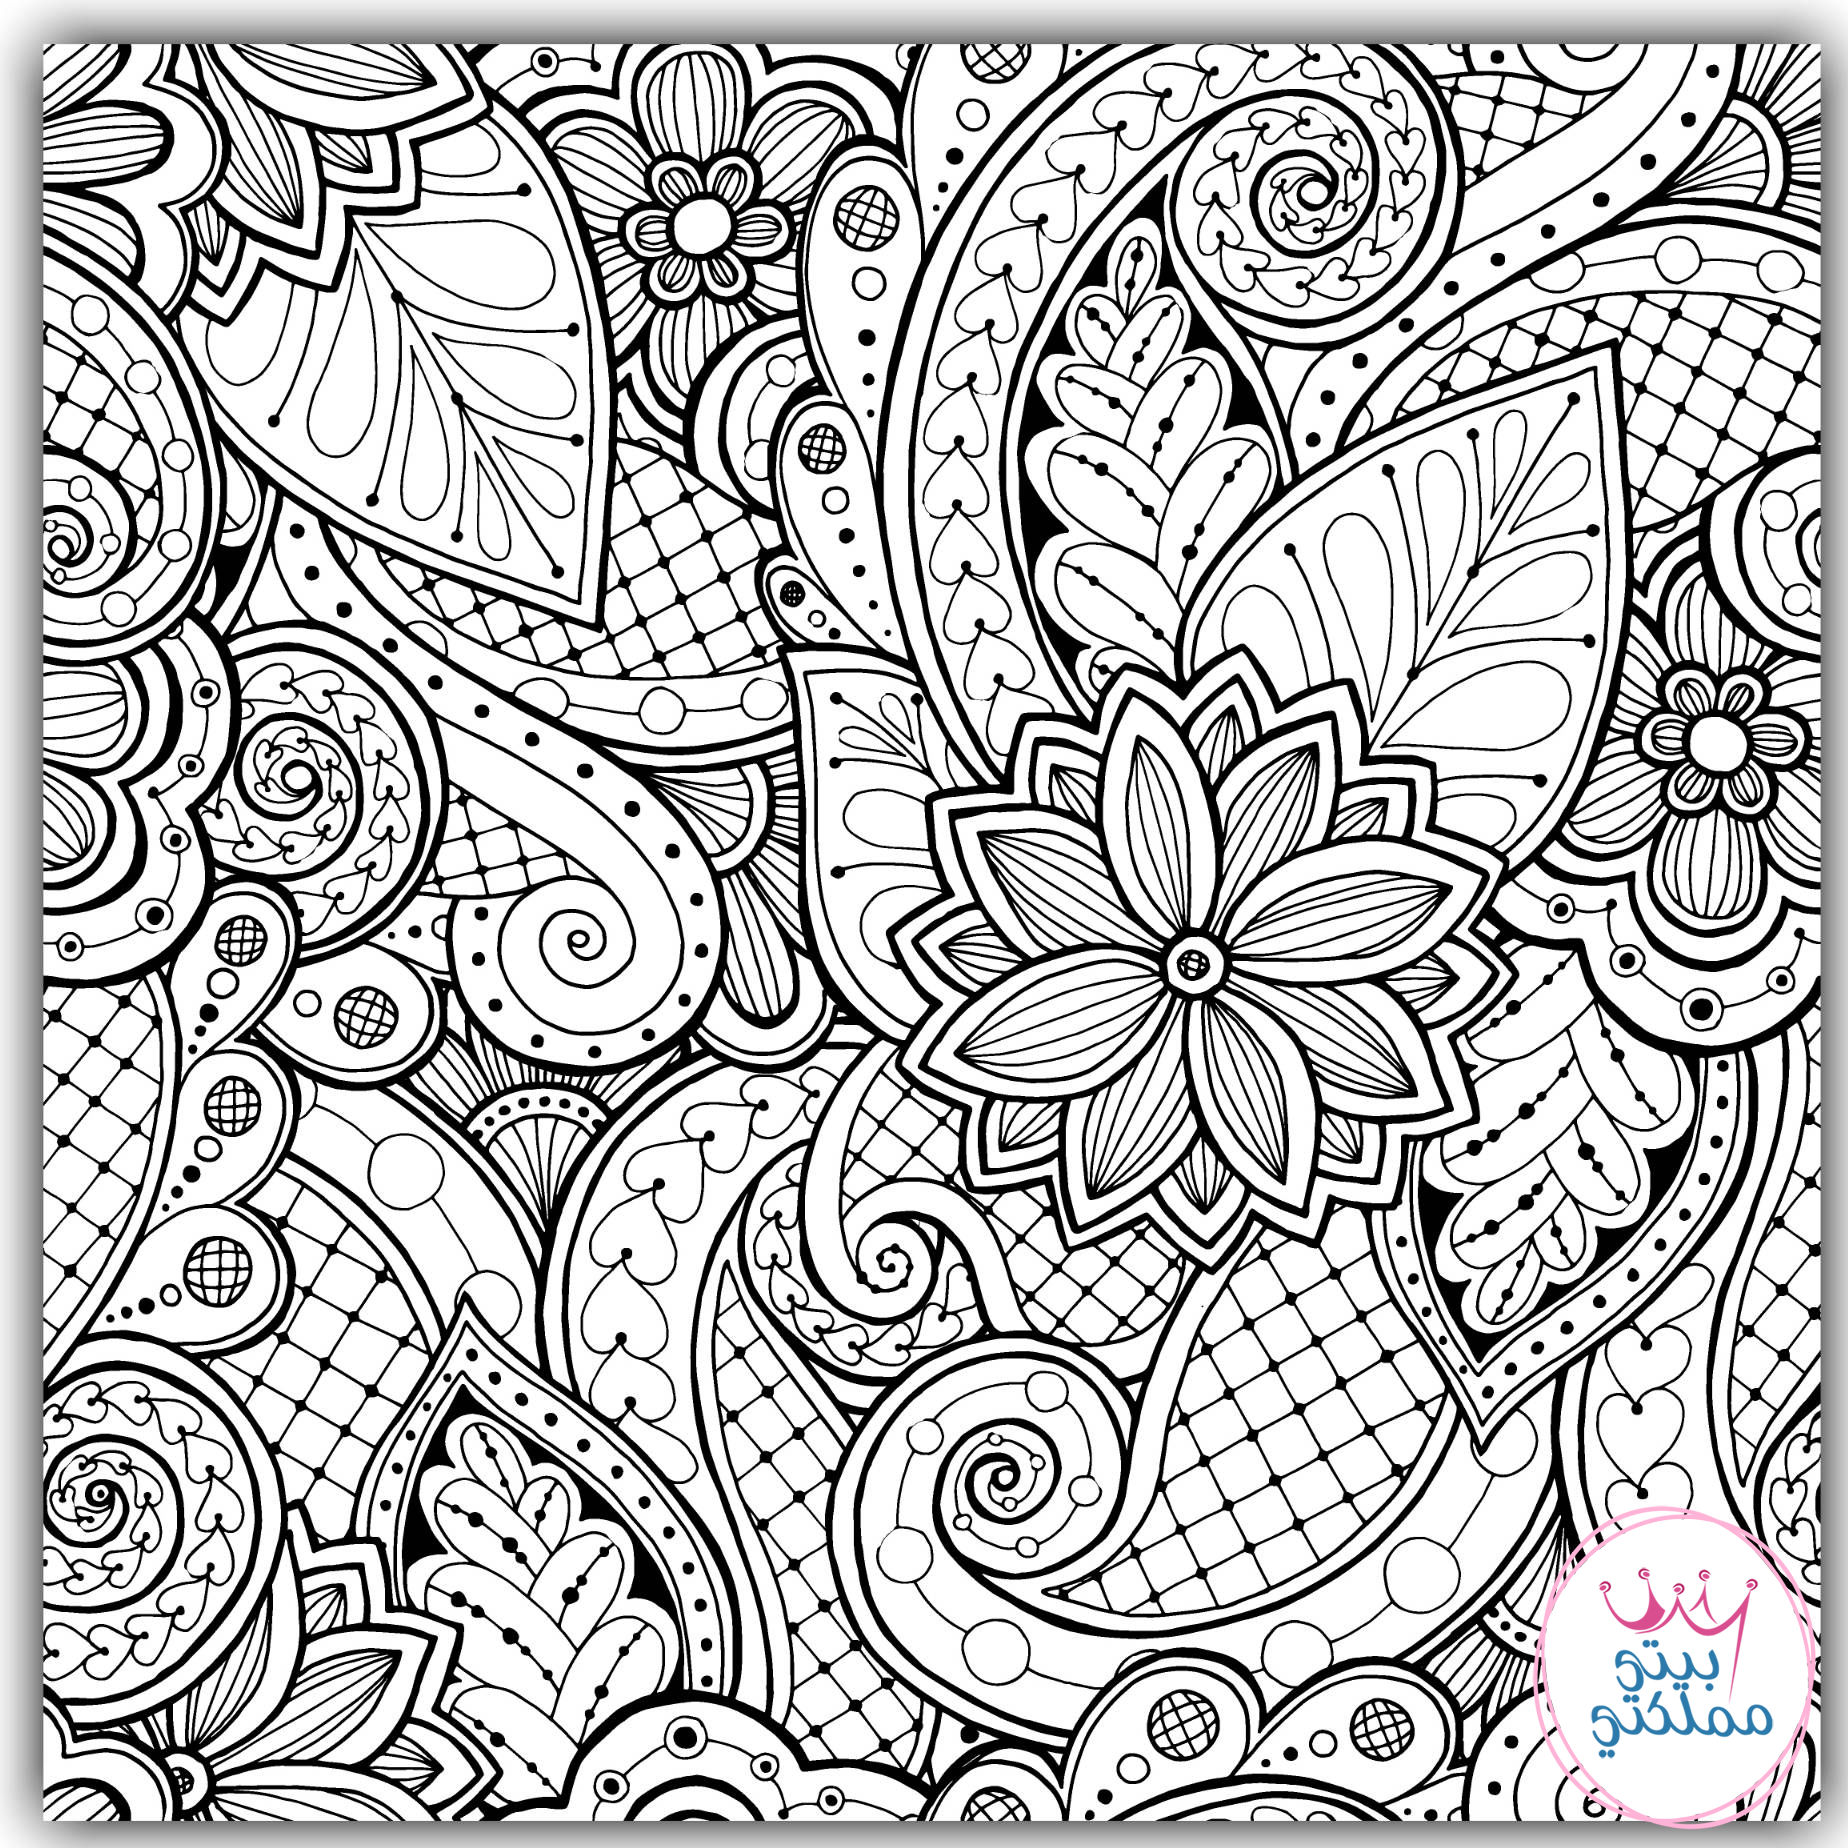 hace frio coloring pages - photo #24